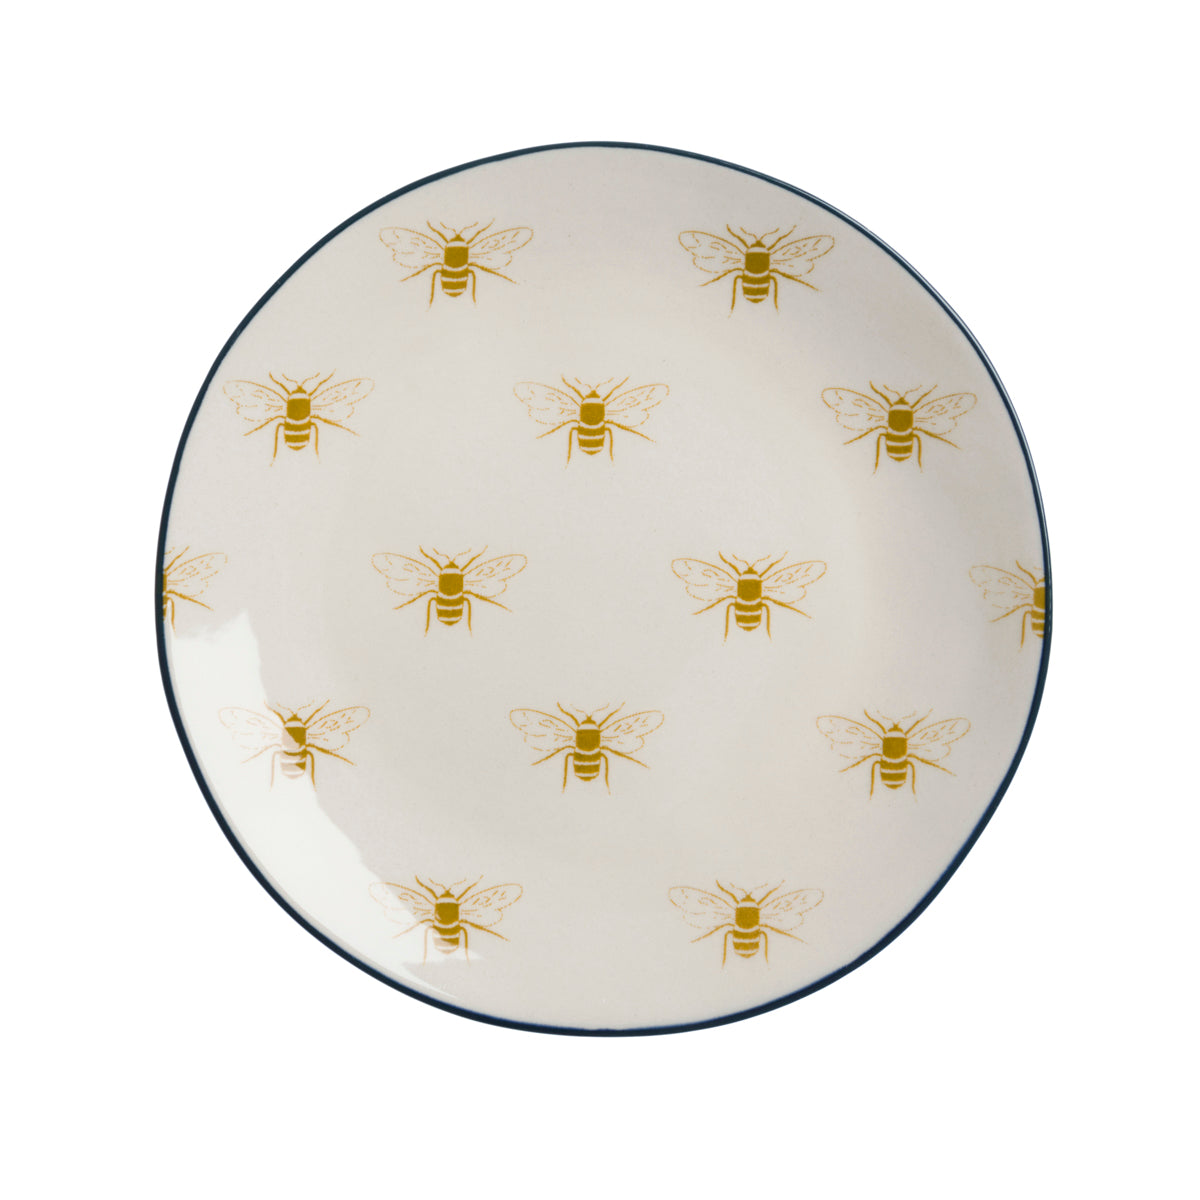 Bees Stoneware Side Plate by Sophie Allport